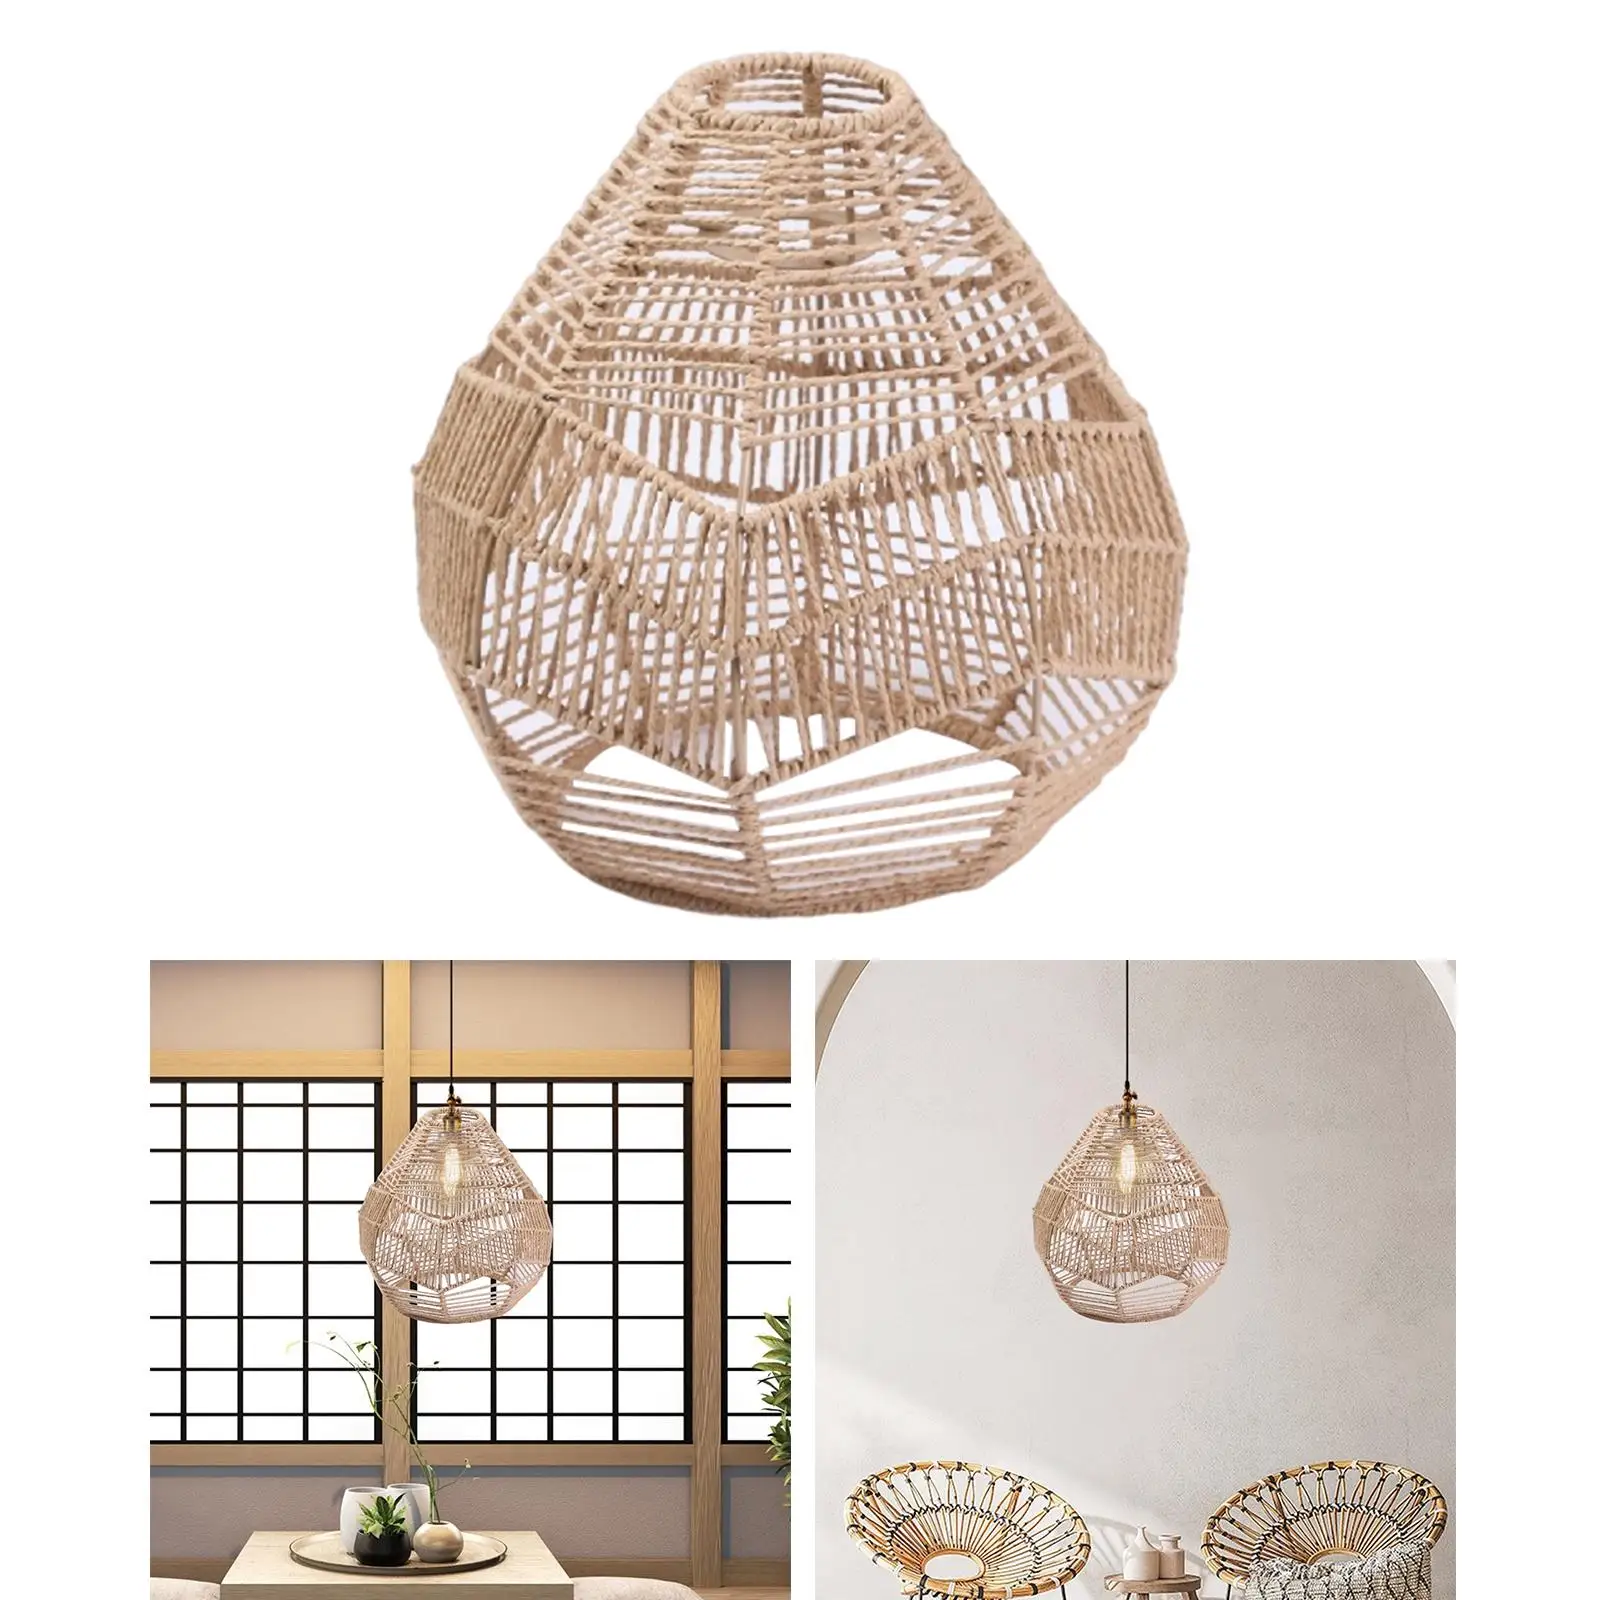 Boho Pendant Lamp Shade Ceiling Light Shade Chandelier Cover Lampshade for Living Room Hotel Restaurant Teahouse Decoration